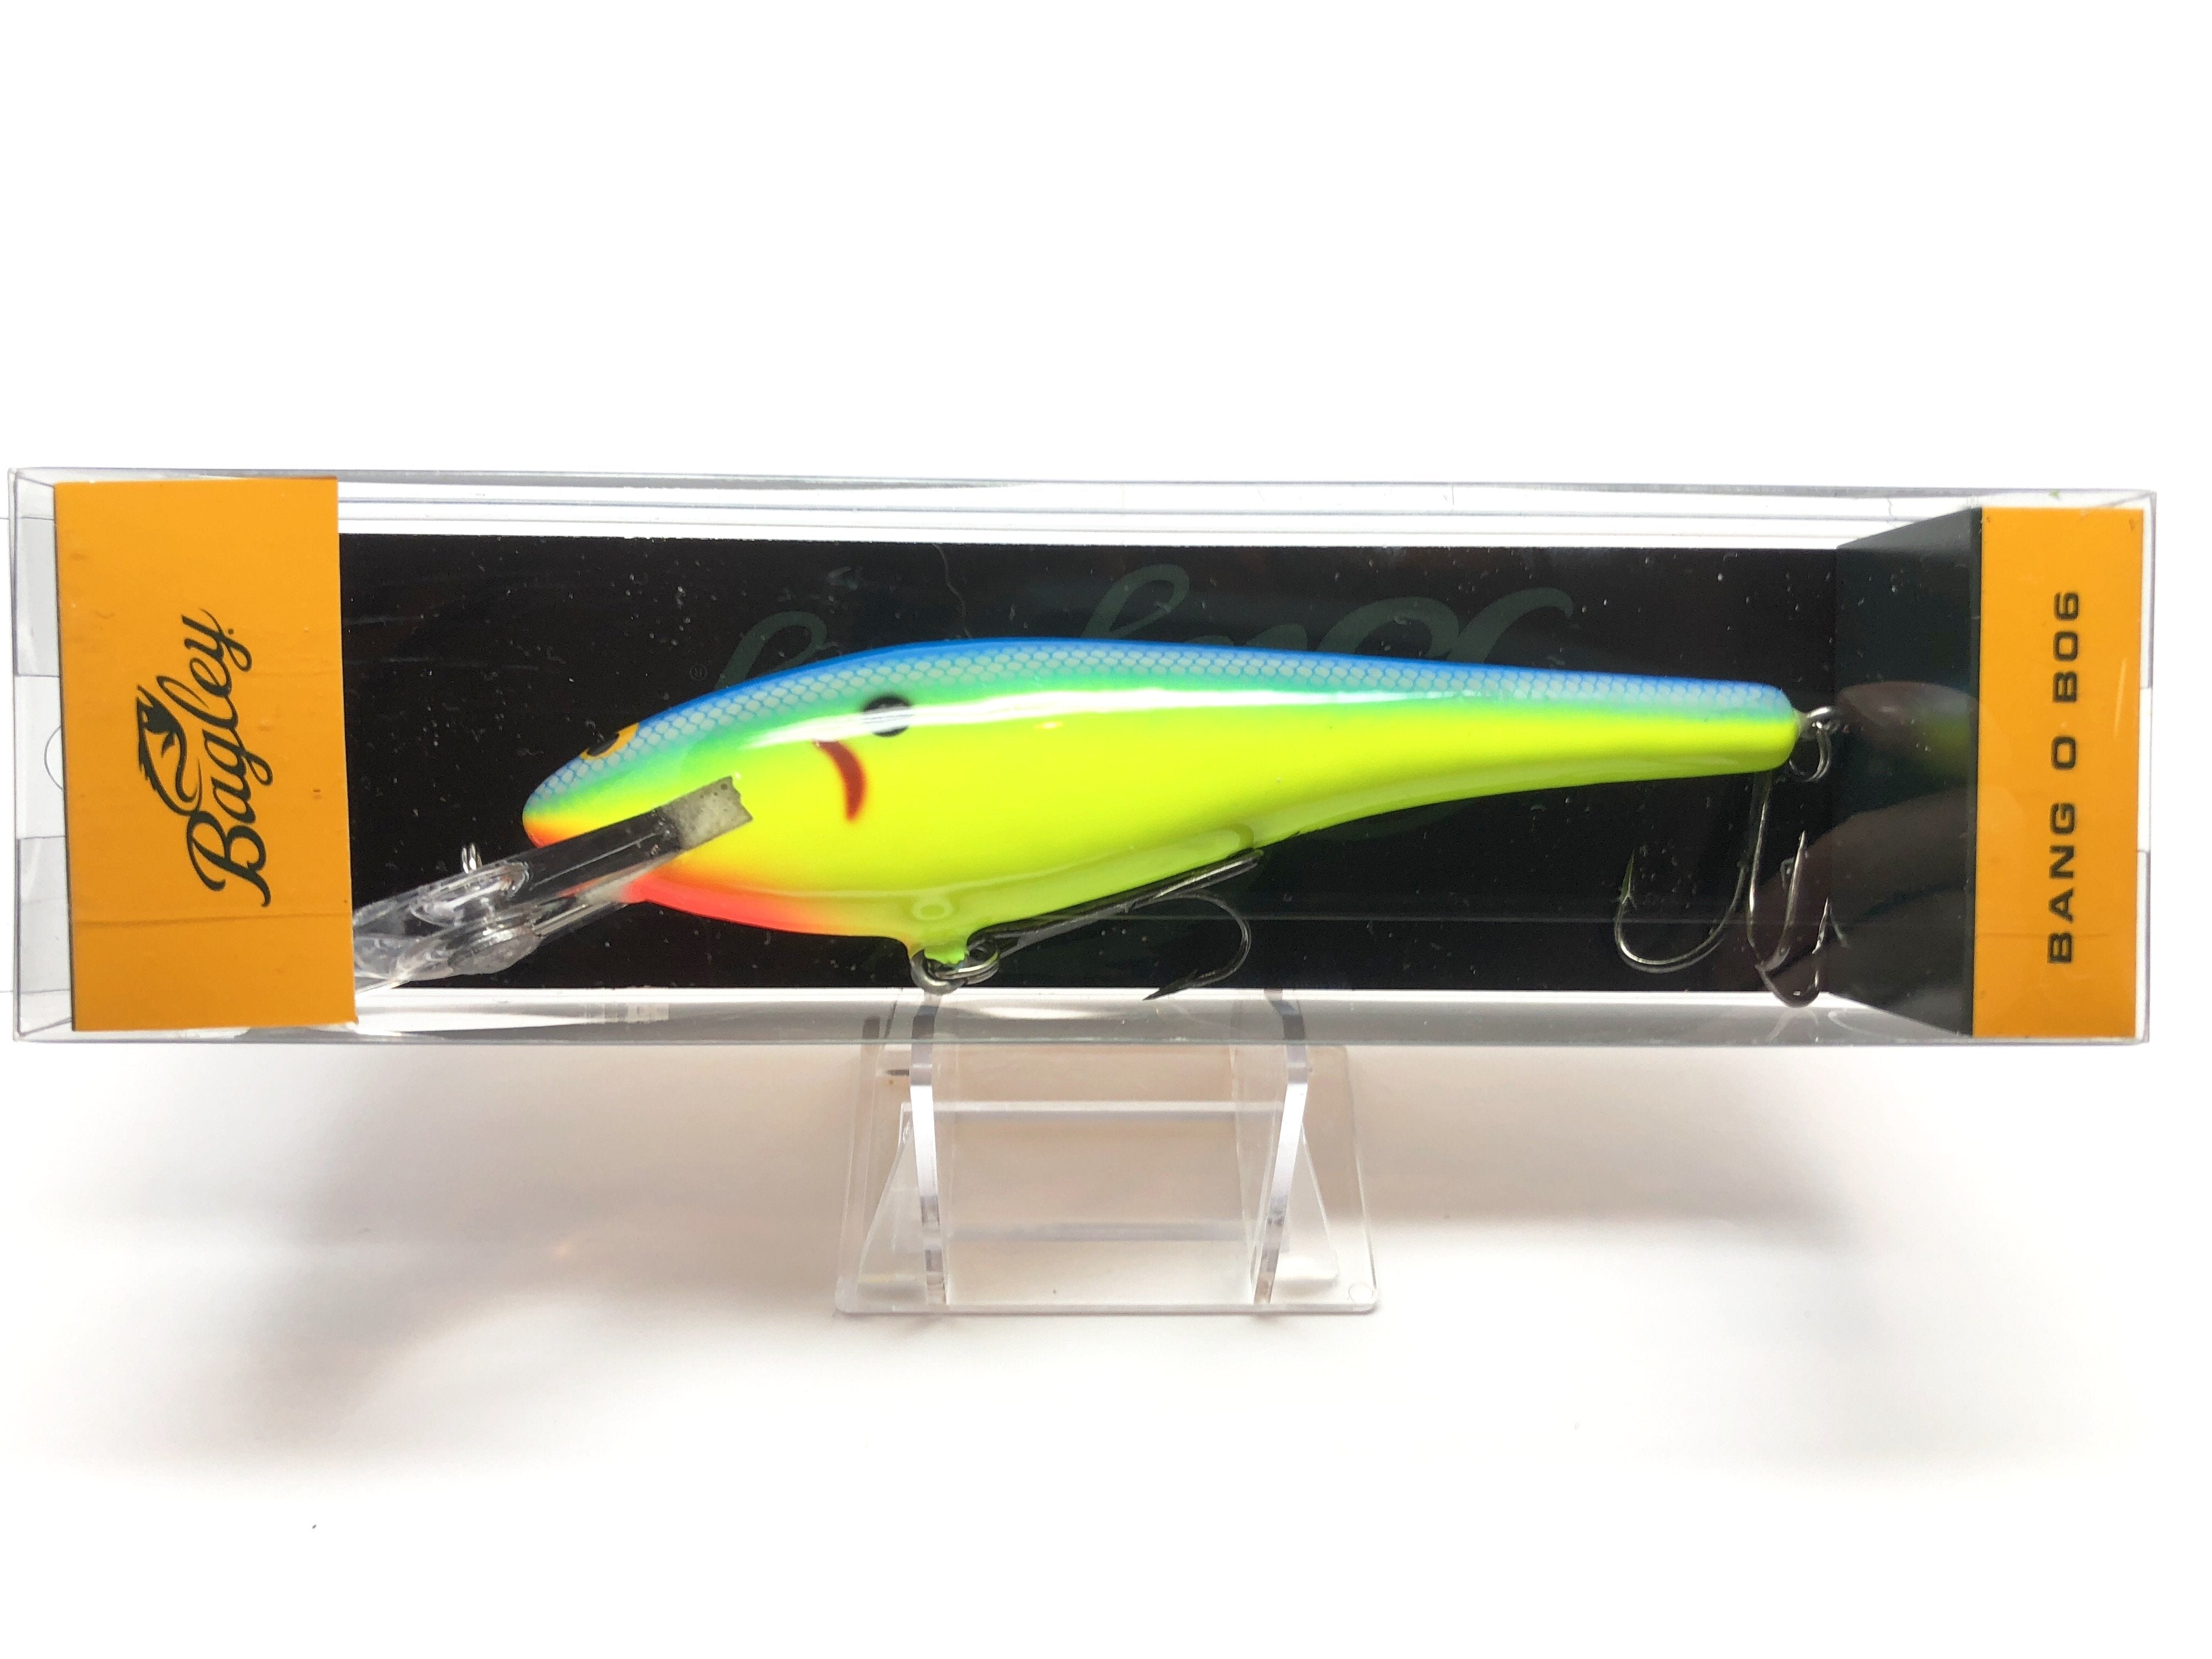 Bagley DB06-GM Musky Fishing Lure New in Box Ghost Minnow Color